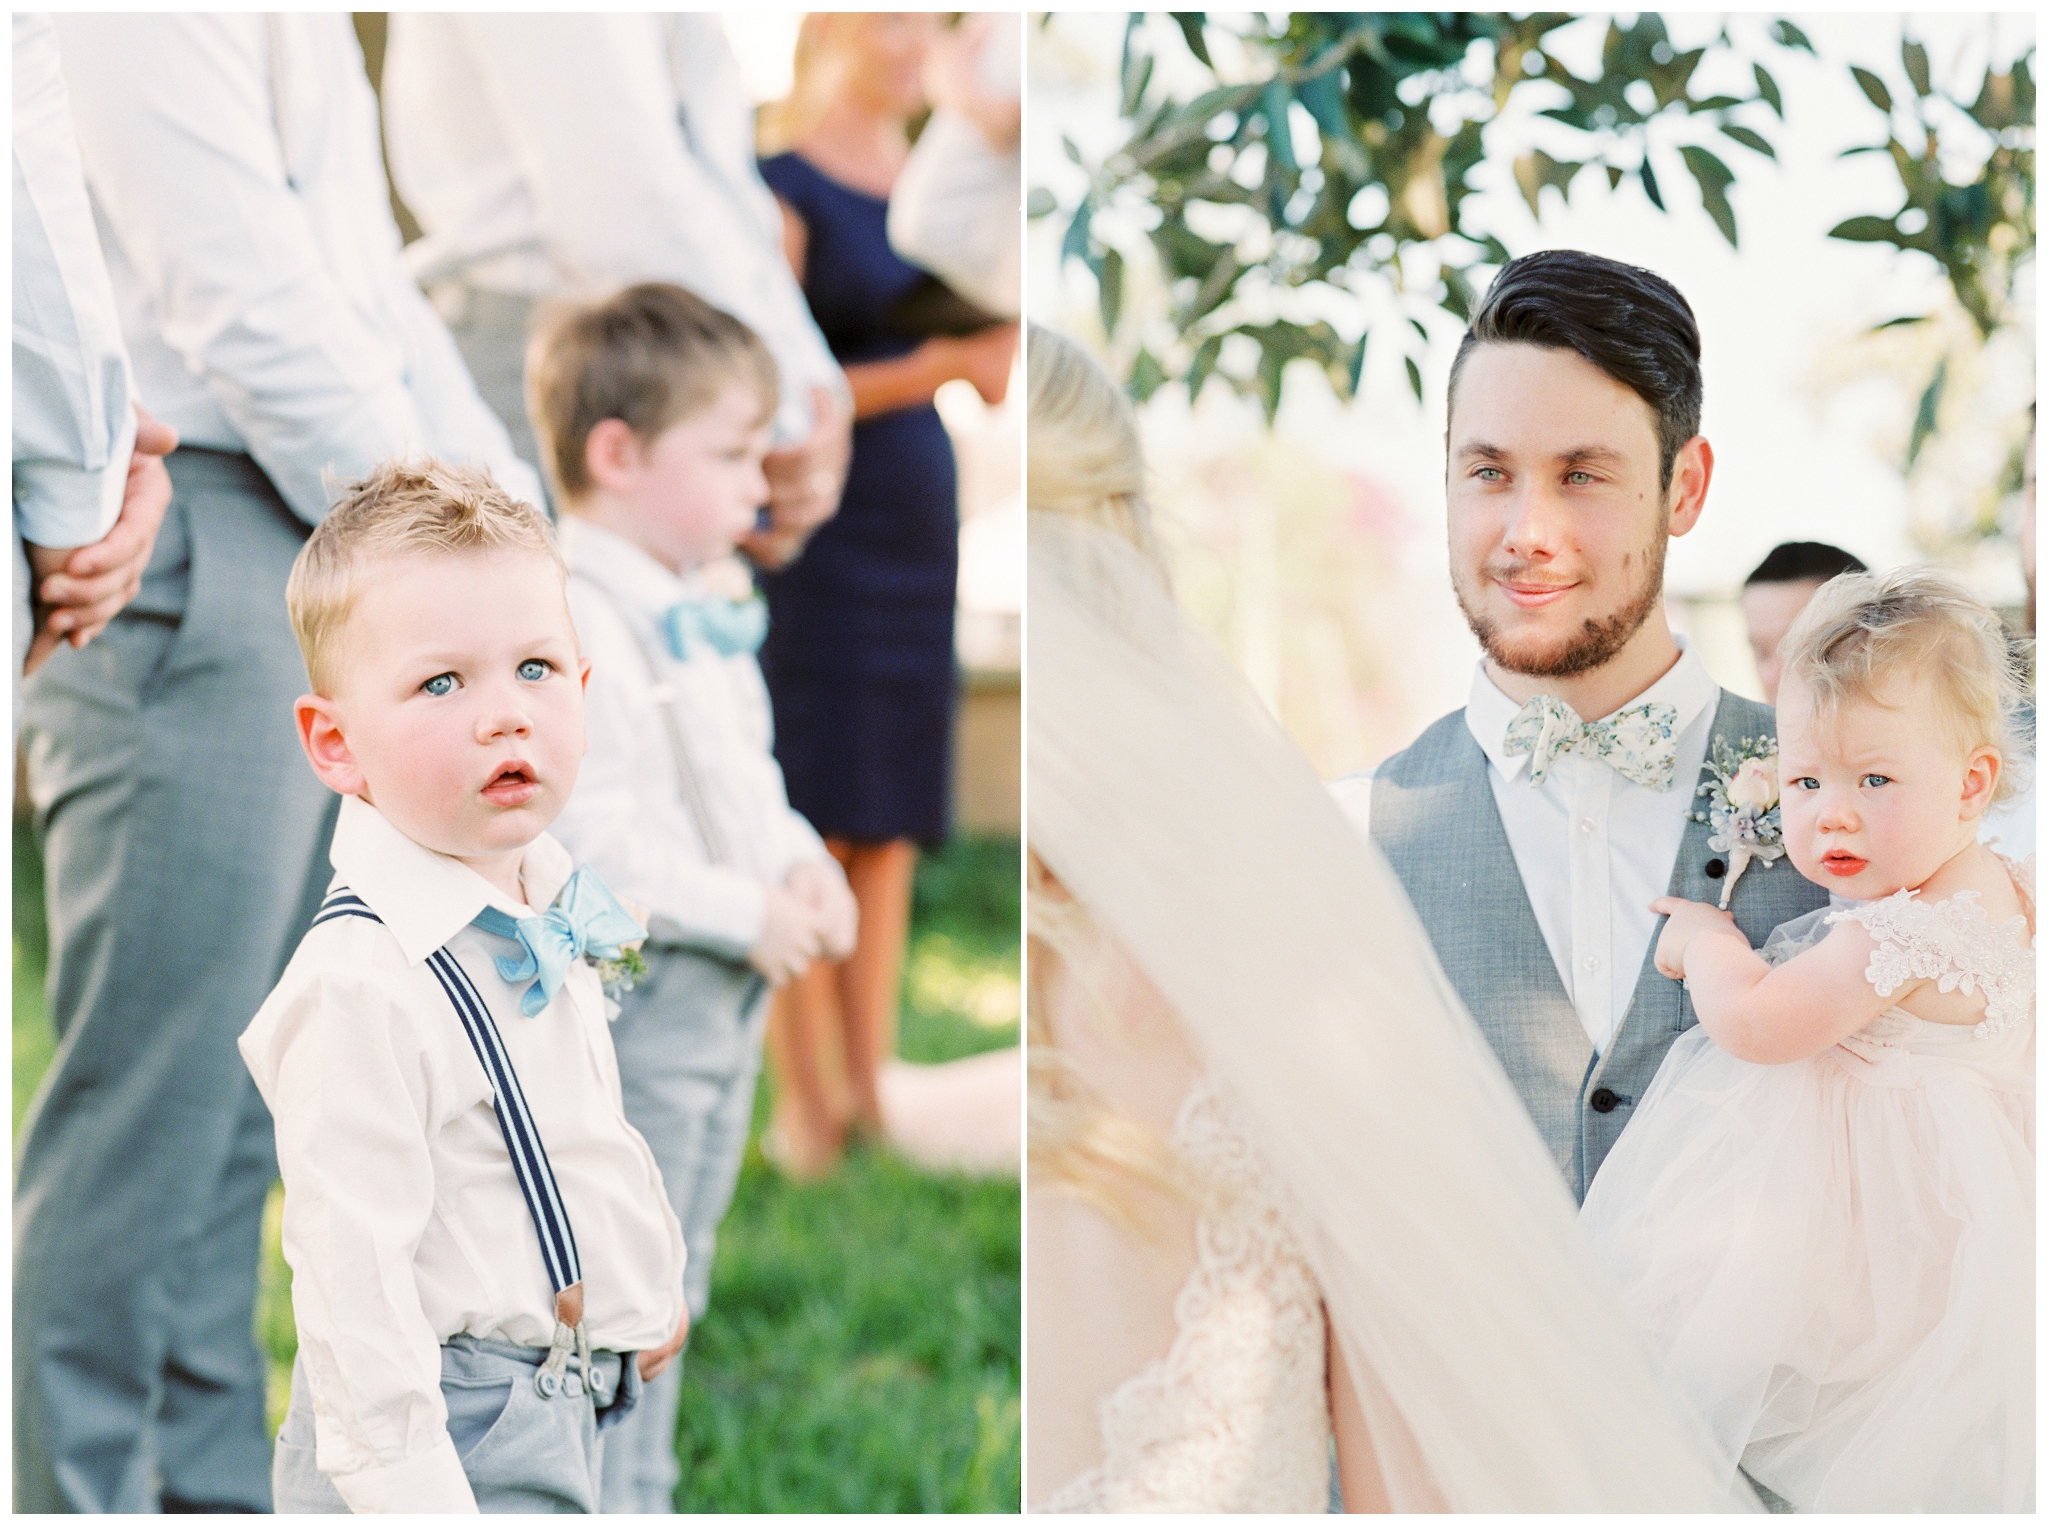 Tegan and Alex Wedding at Albert River Wines by Casey Jane Photography 33